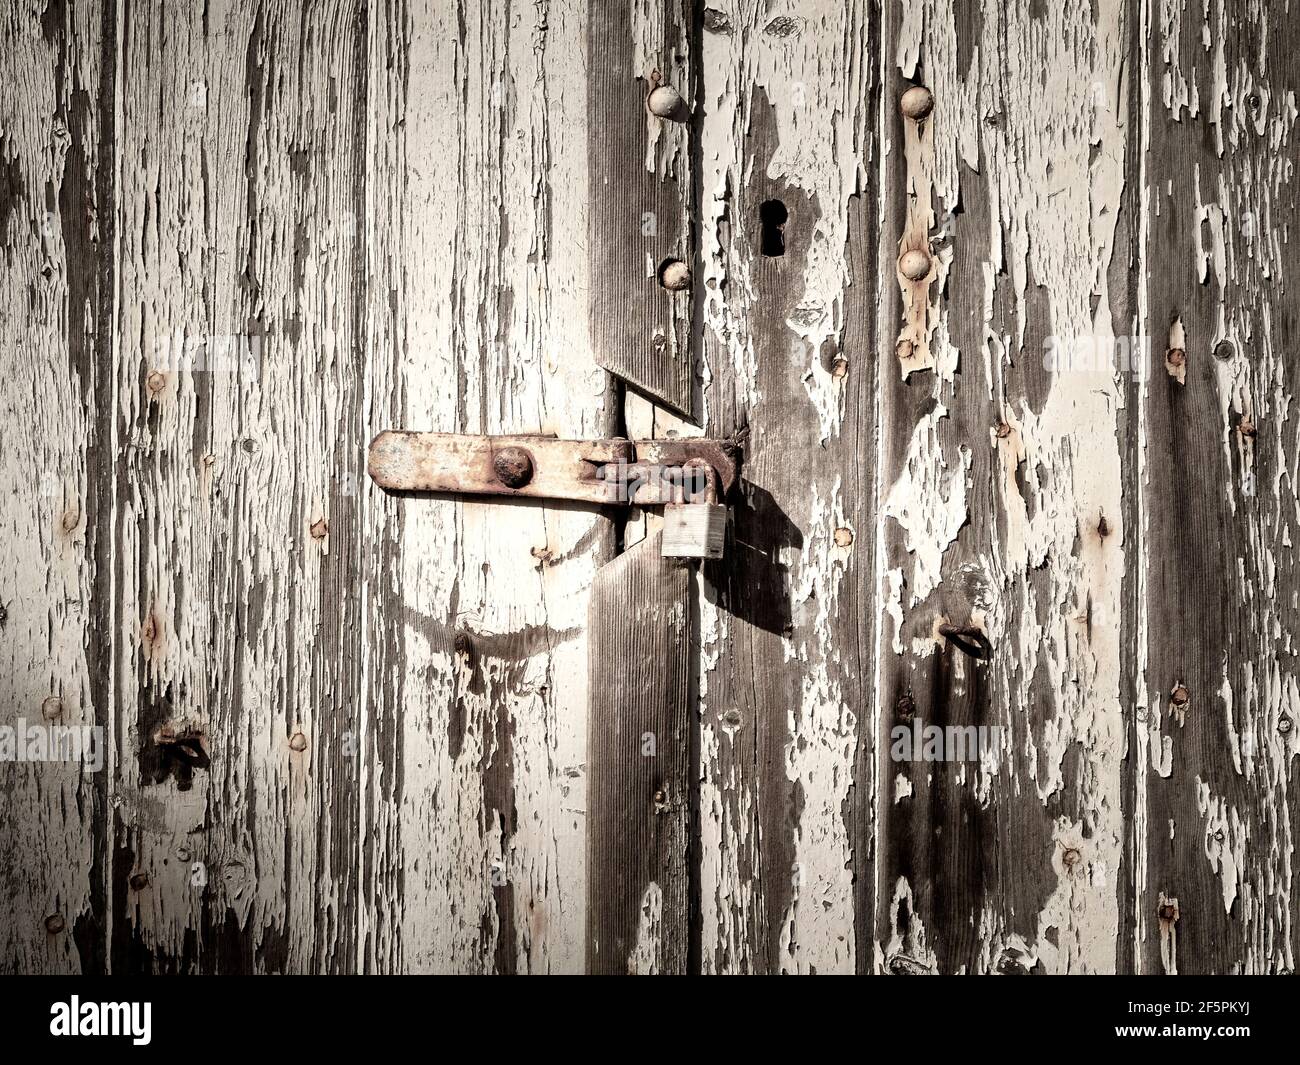 A section of a dilapidated shed door with heavily flaking paint and a rusting padlock and hasp Stock Photo